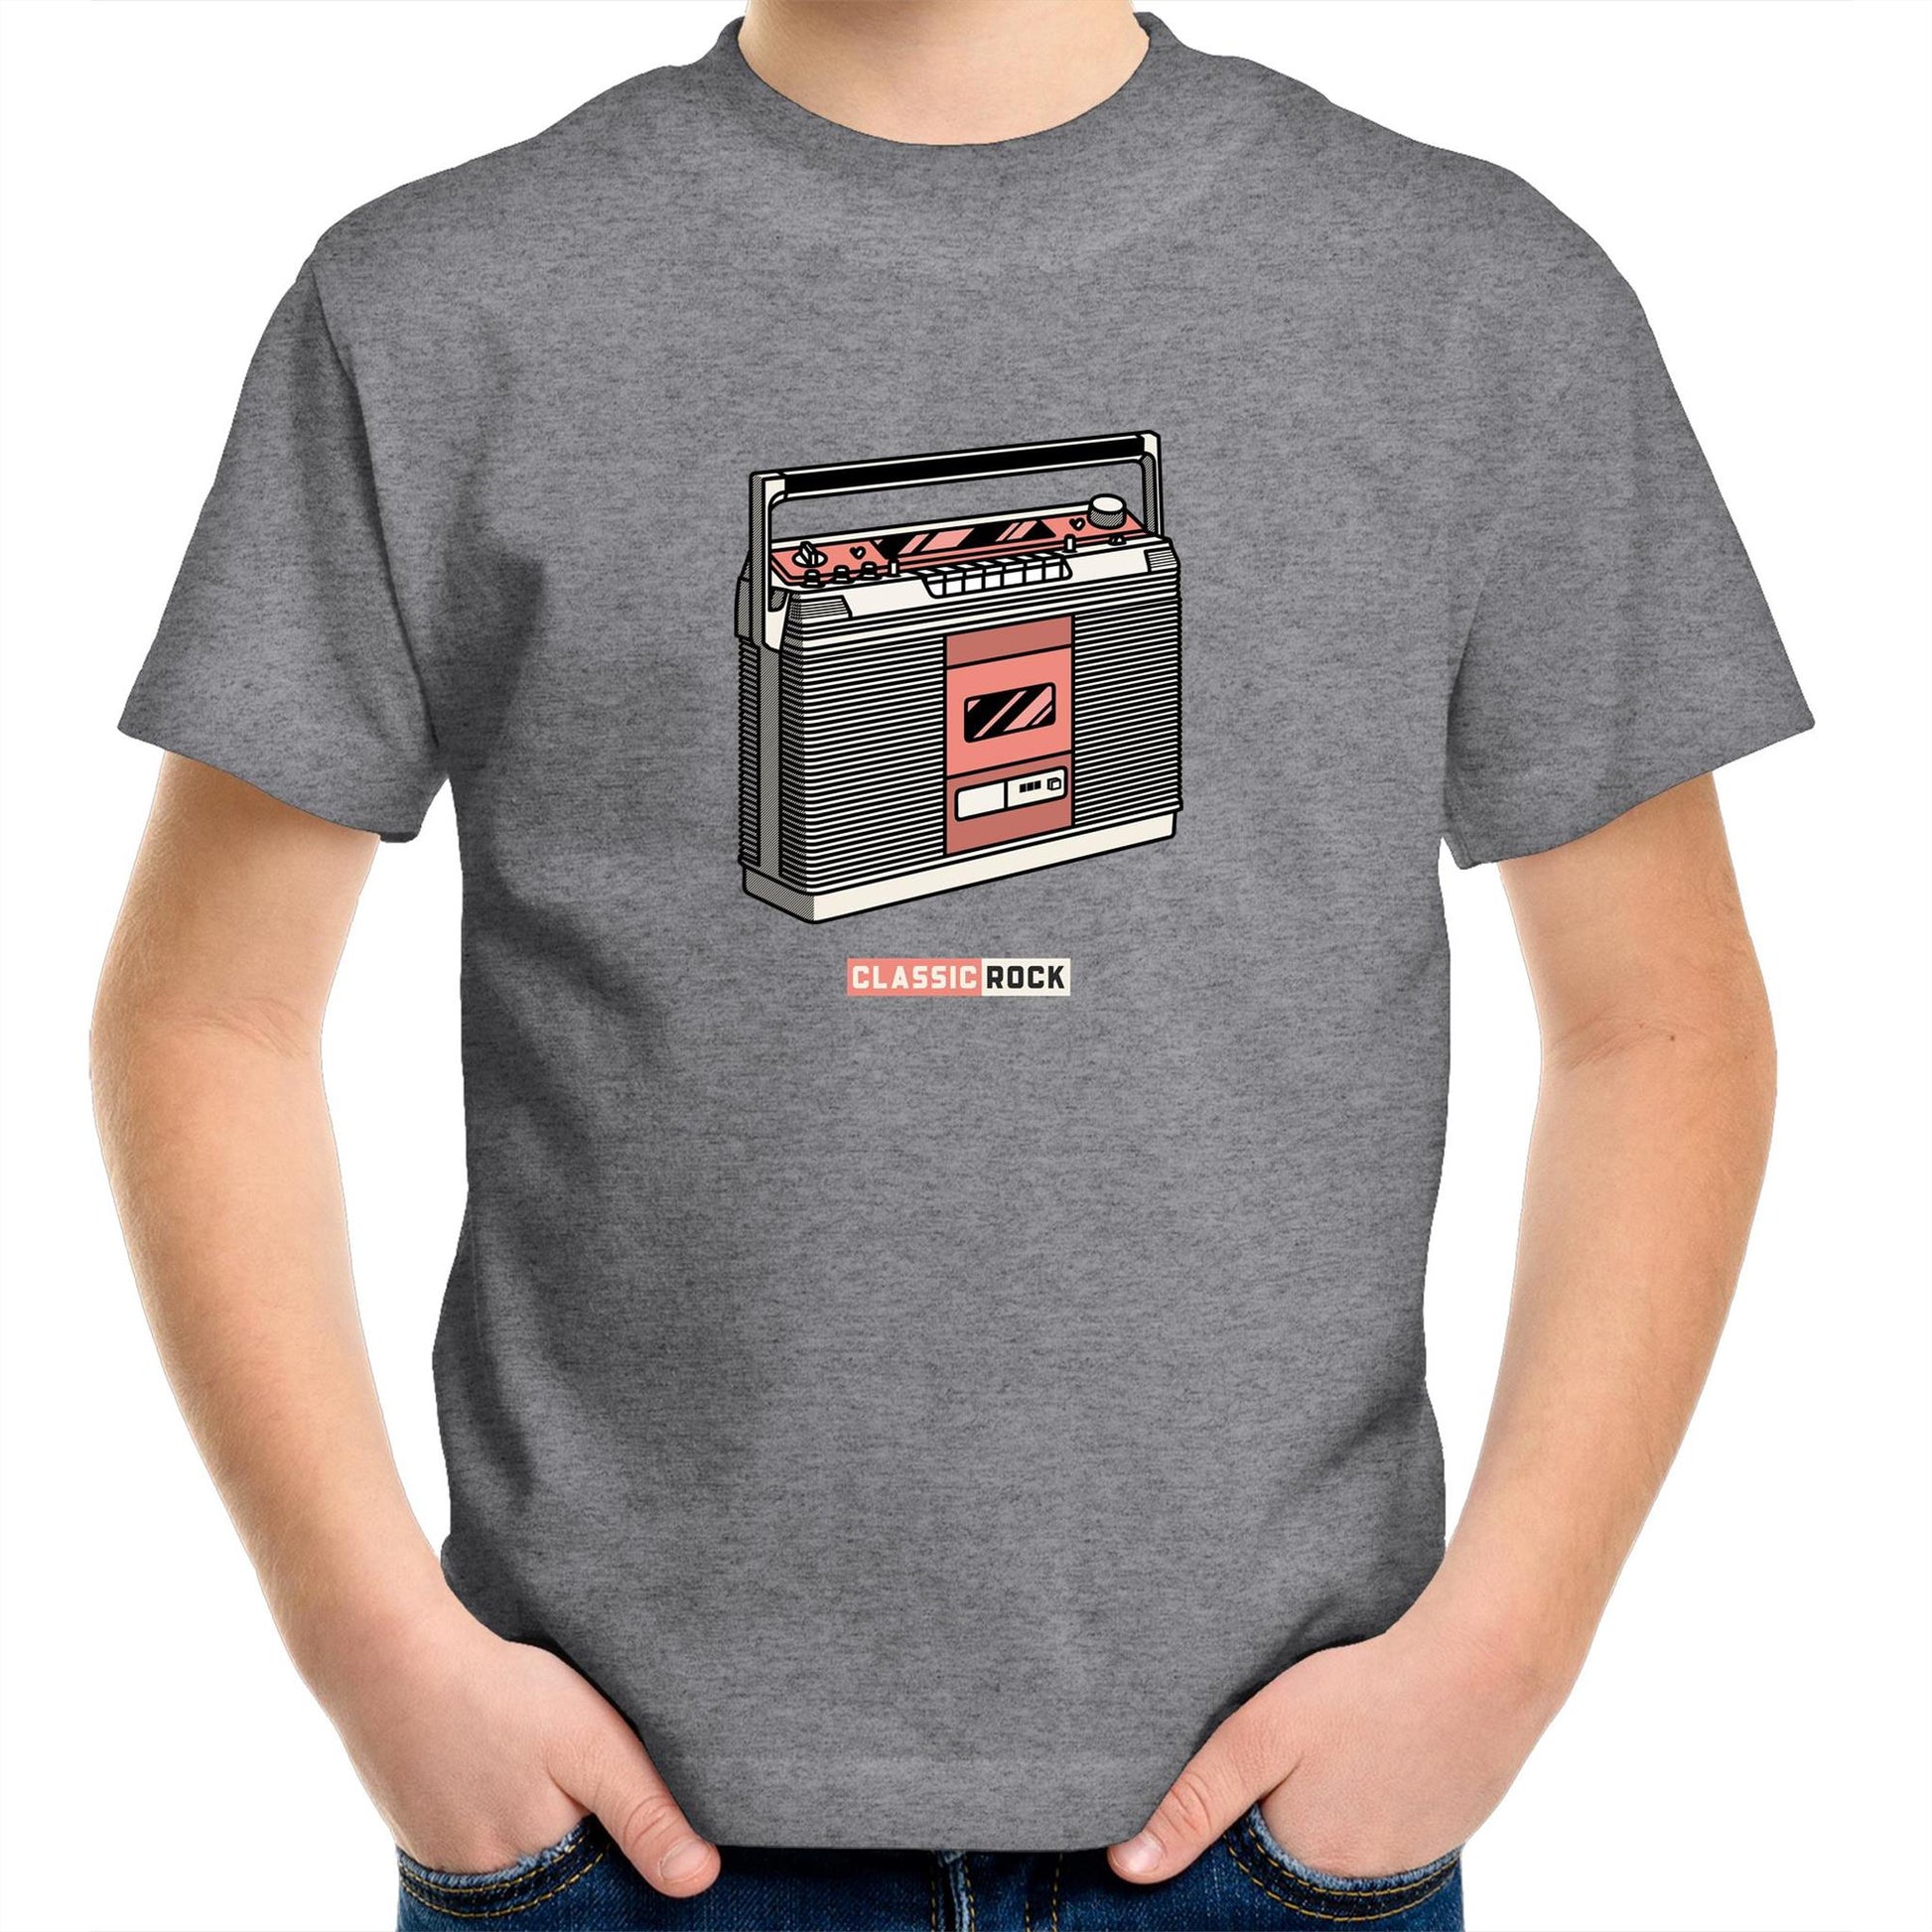 Classic Rock, Cassette Player Kids Youth Crew T-Shirt Grey Marle Kids Youth T-shirt Music Retro